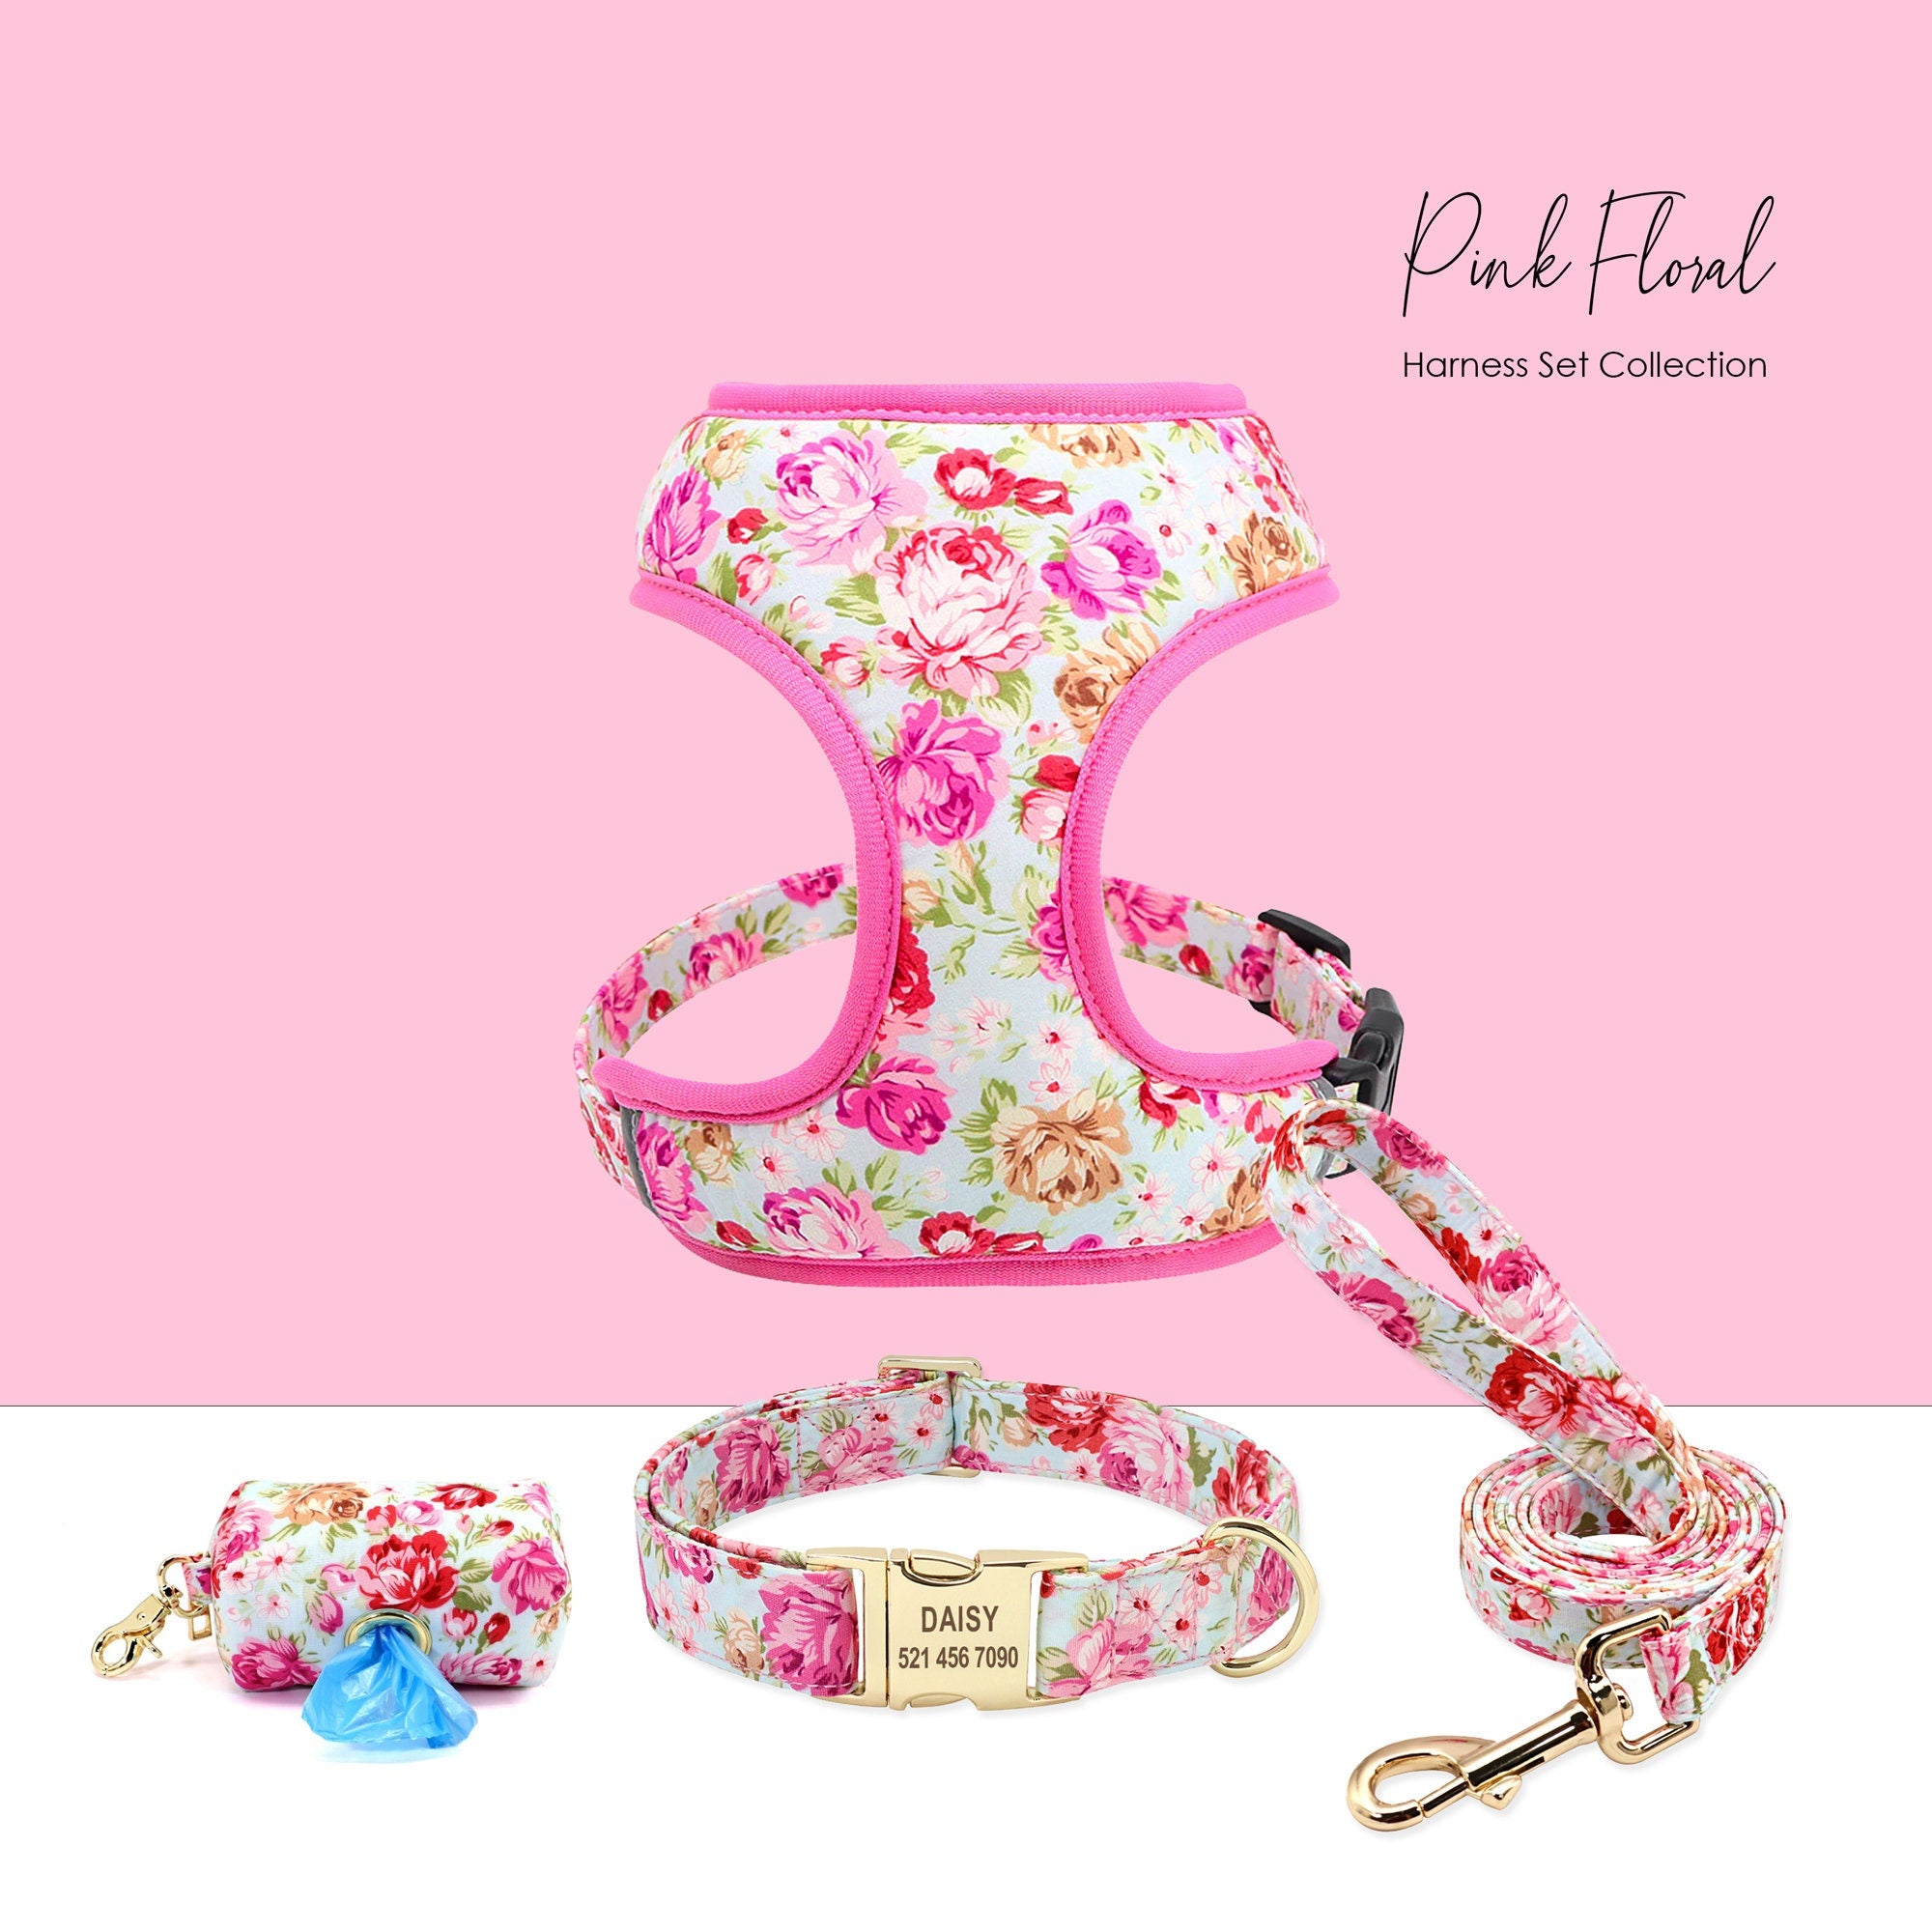 Personalized Engraved Handmade Dog Collar in Pink and Fancy Floral Pattern, Trendy Style for All Seasons